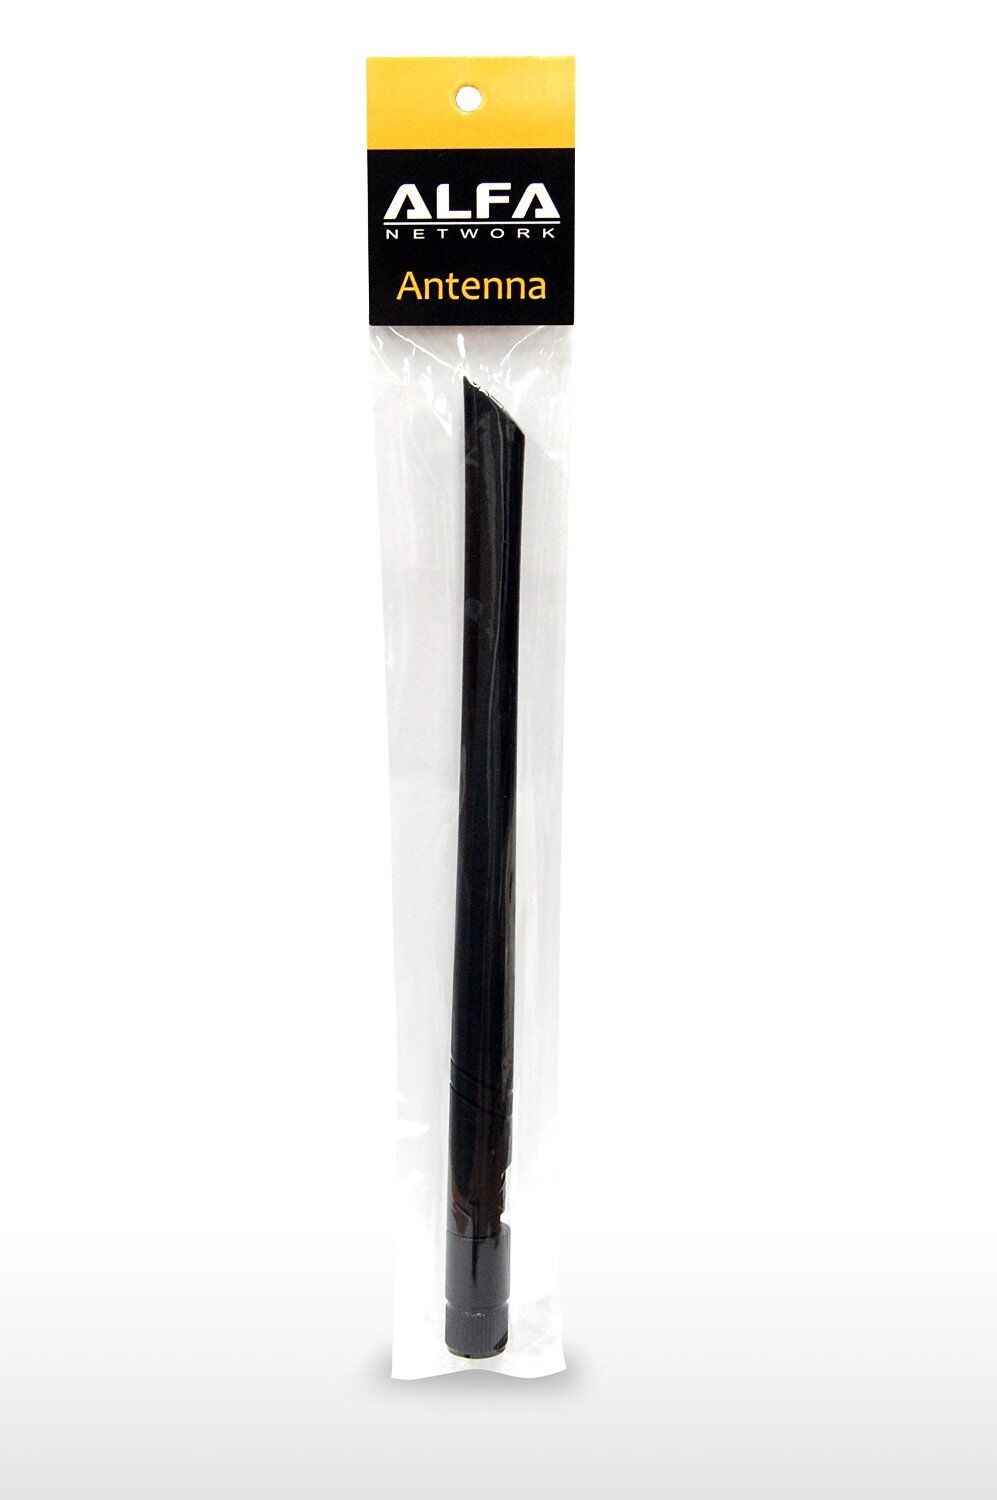 Alfa ARS-NT5B Dual Band 2.4/5 GHz RP-SMA Wi-Fi antenna for Asus 802.11ac 802.11n